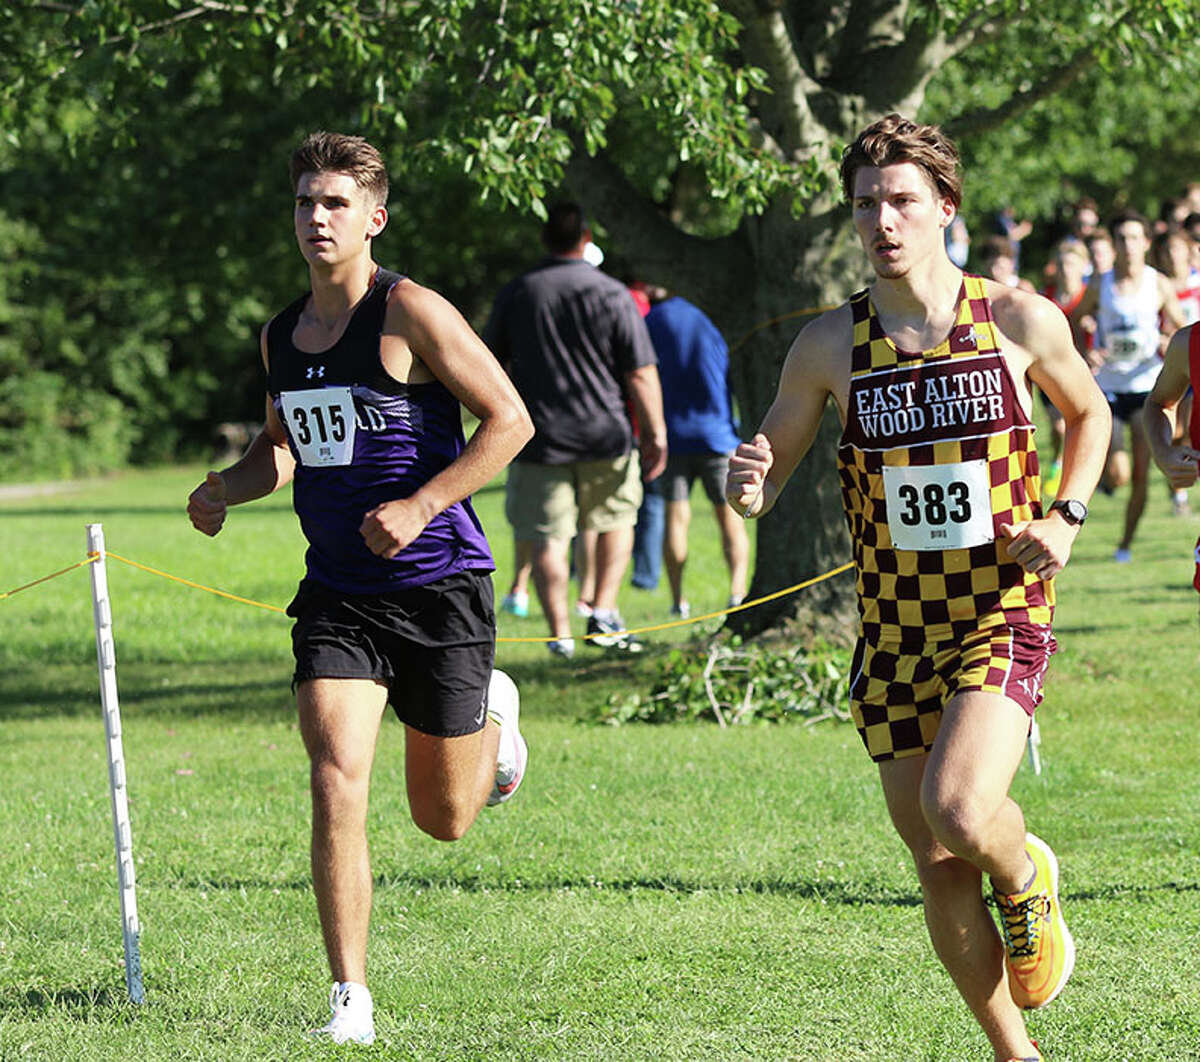 Litchfield's Camden Quarton (left) and EA-WR's Aidan Loeffelman run together in the opening mile of the Carlinville Early Meet on Aug. 30. On Saturday, Quarton won the juniors race and Loeffelman was second in the seniors race at the EA-WR Invite in Wood River.